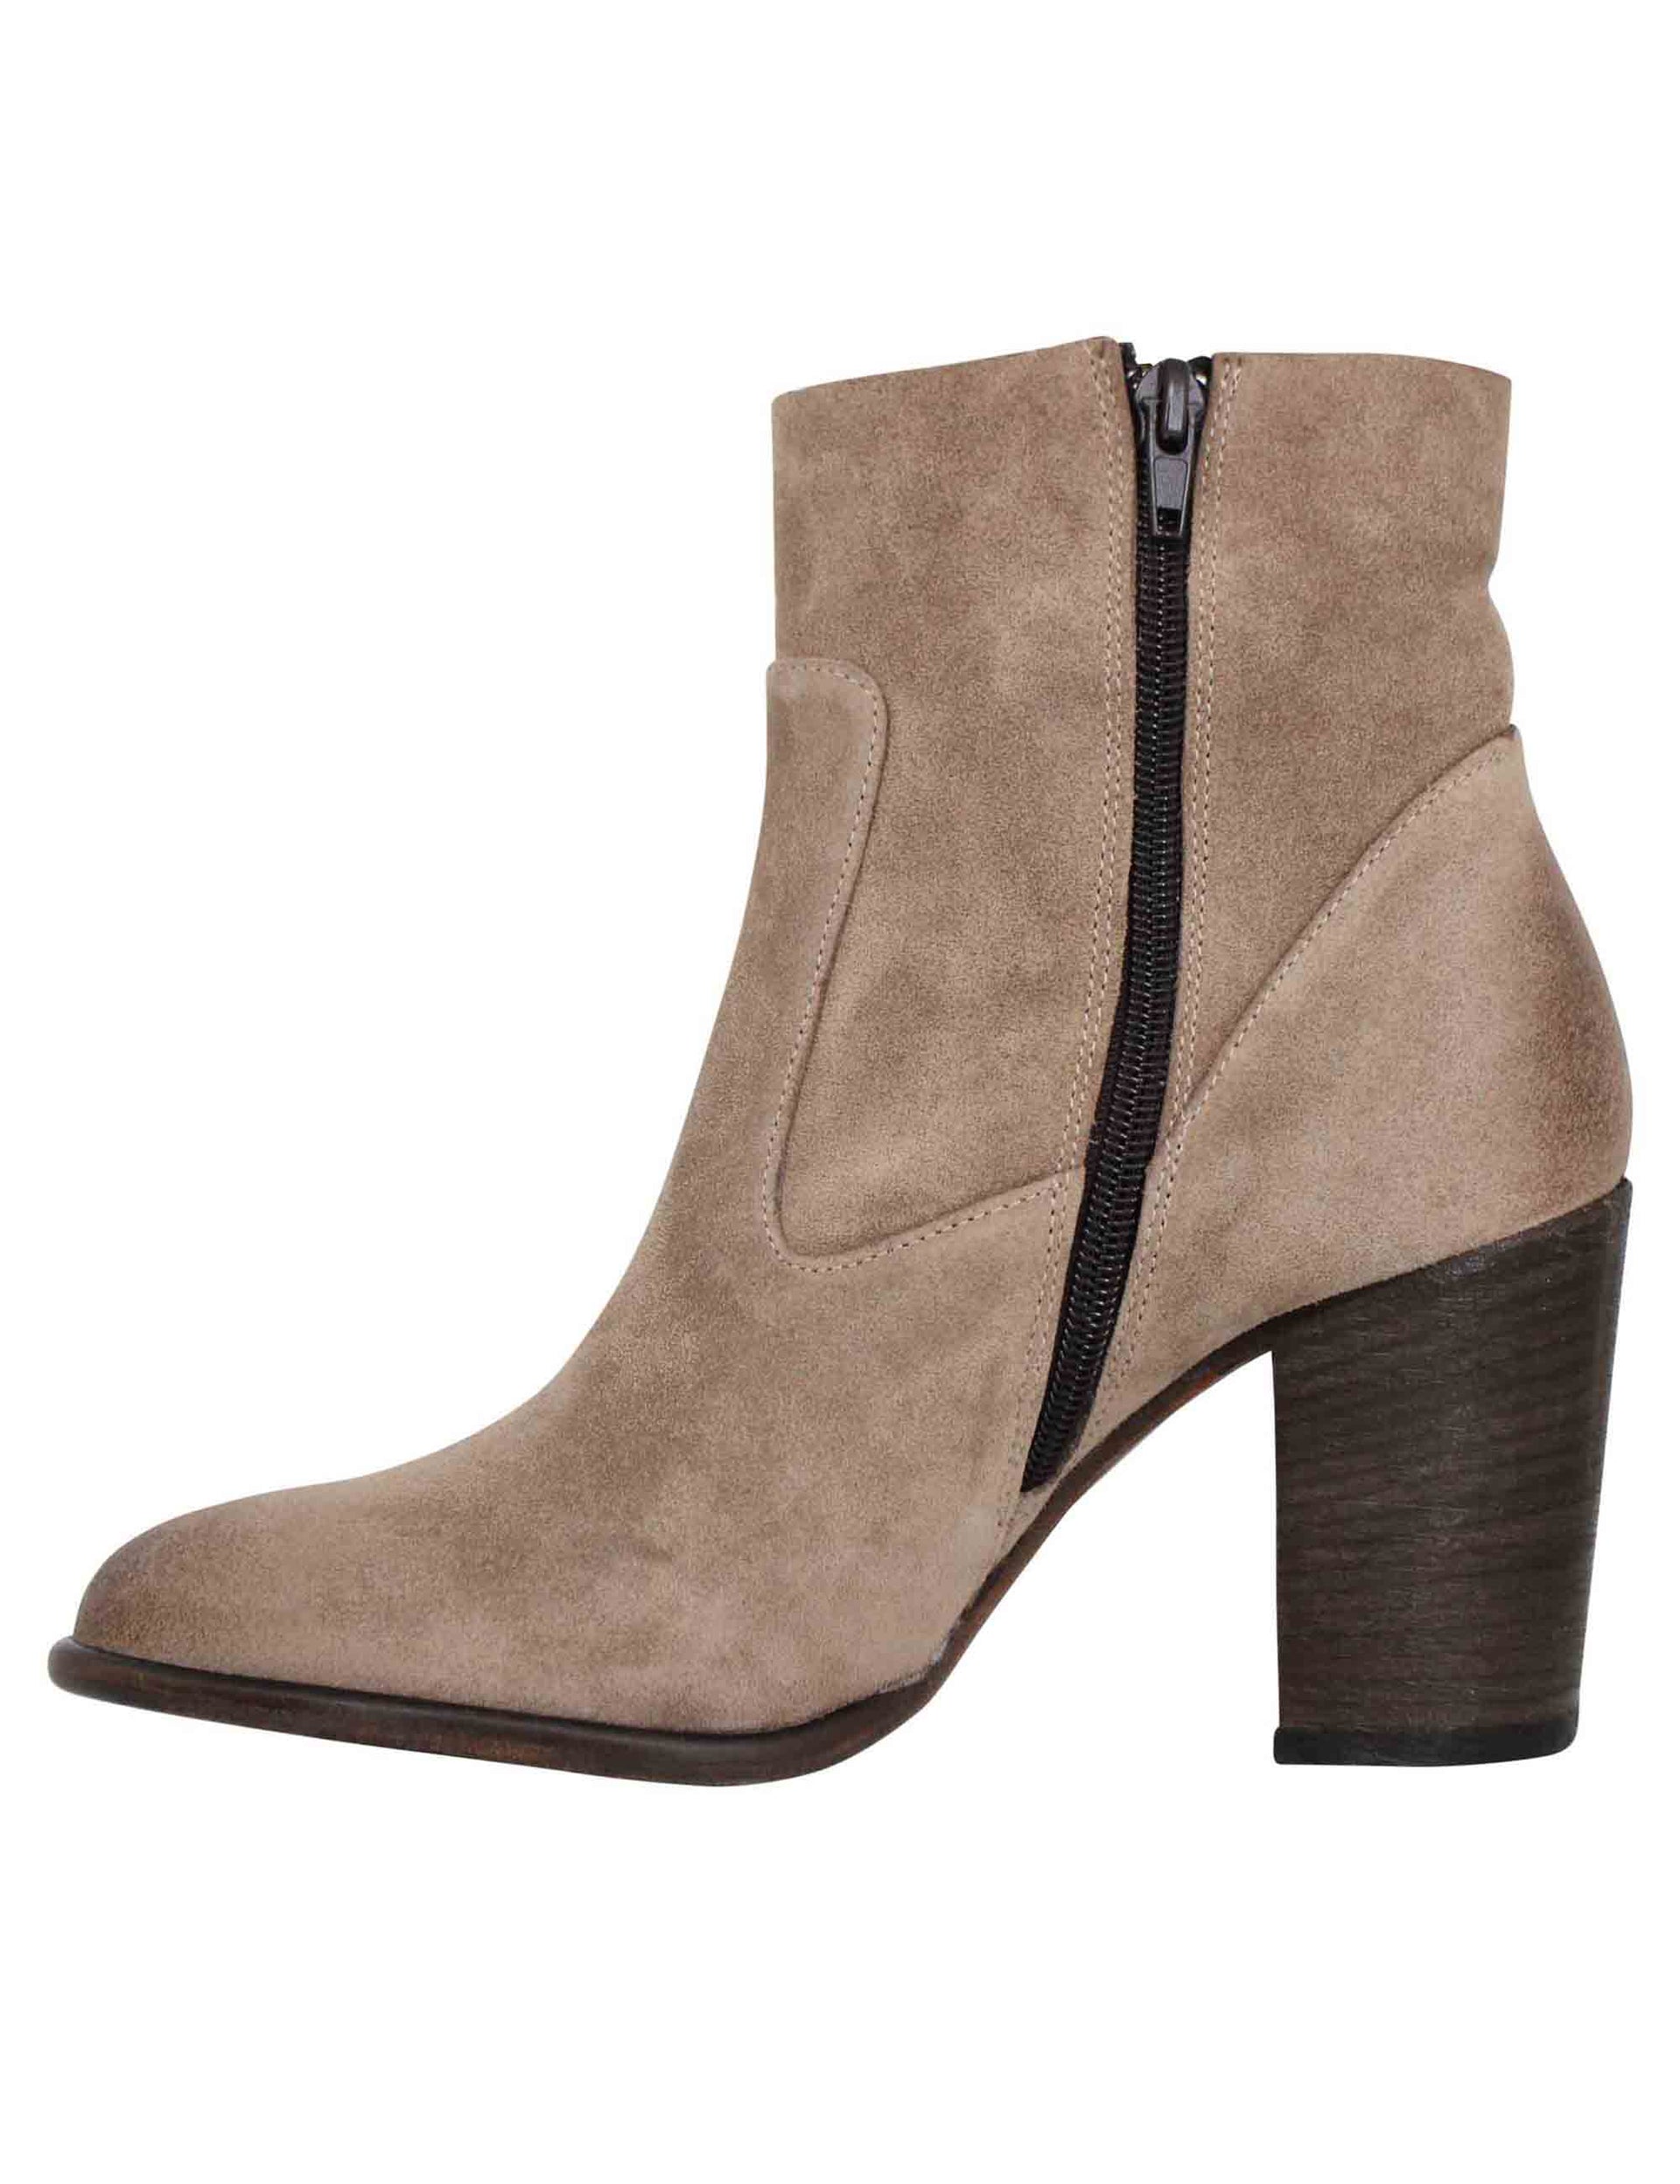 Women's taupe suede ankle boots with high leather heel